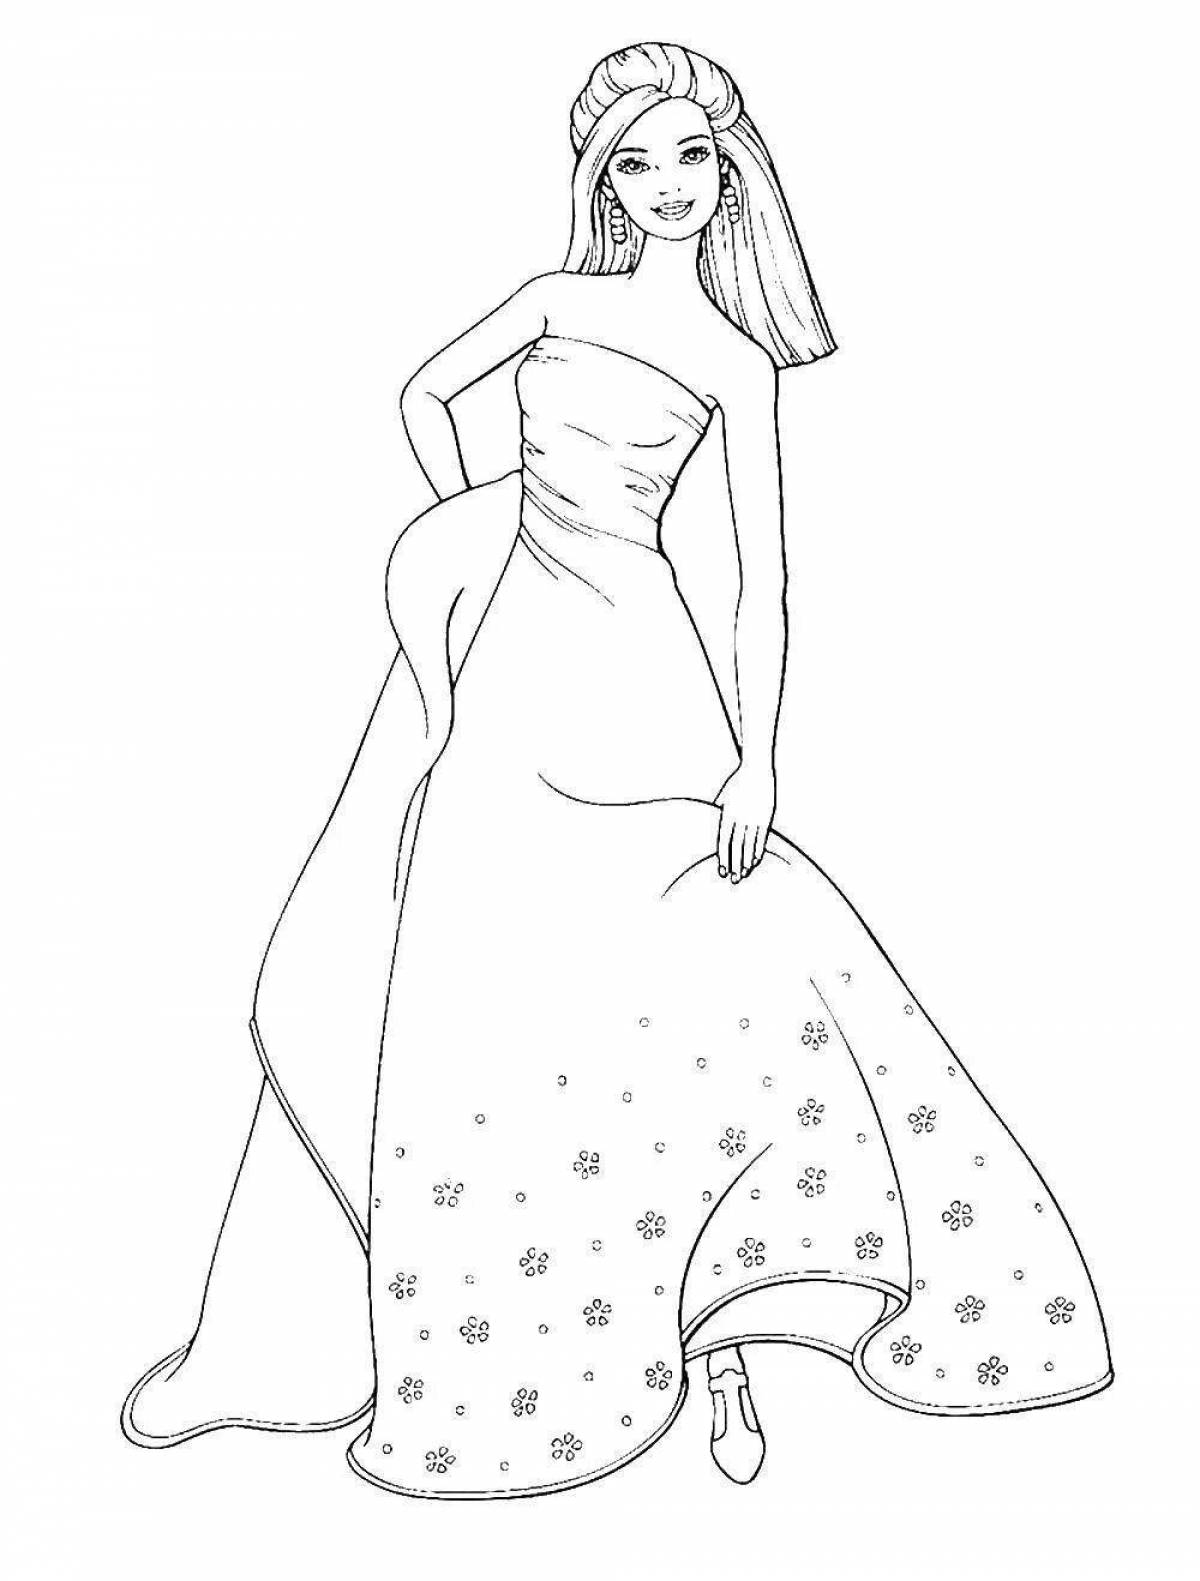 Shiny coloring book Barbie in a fluffy dress